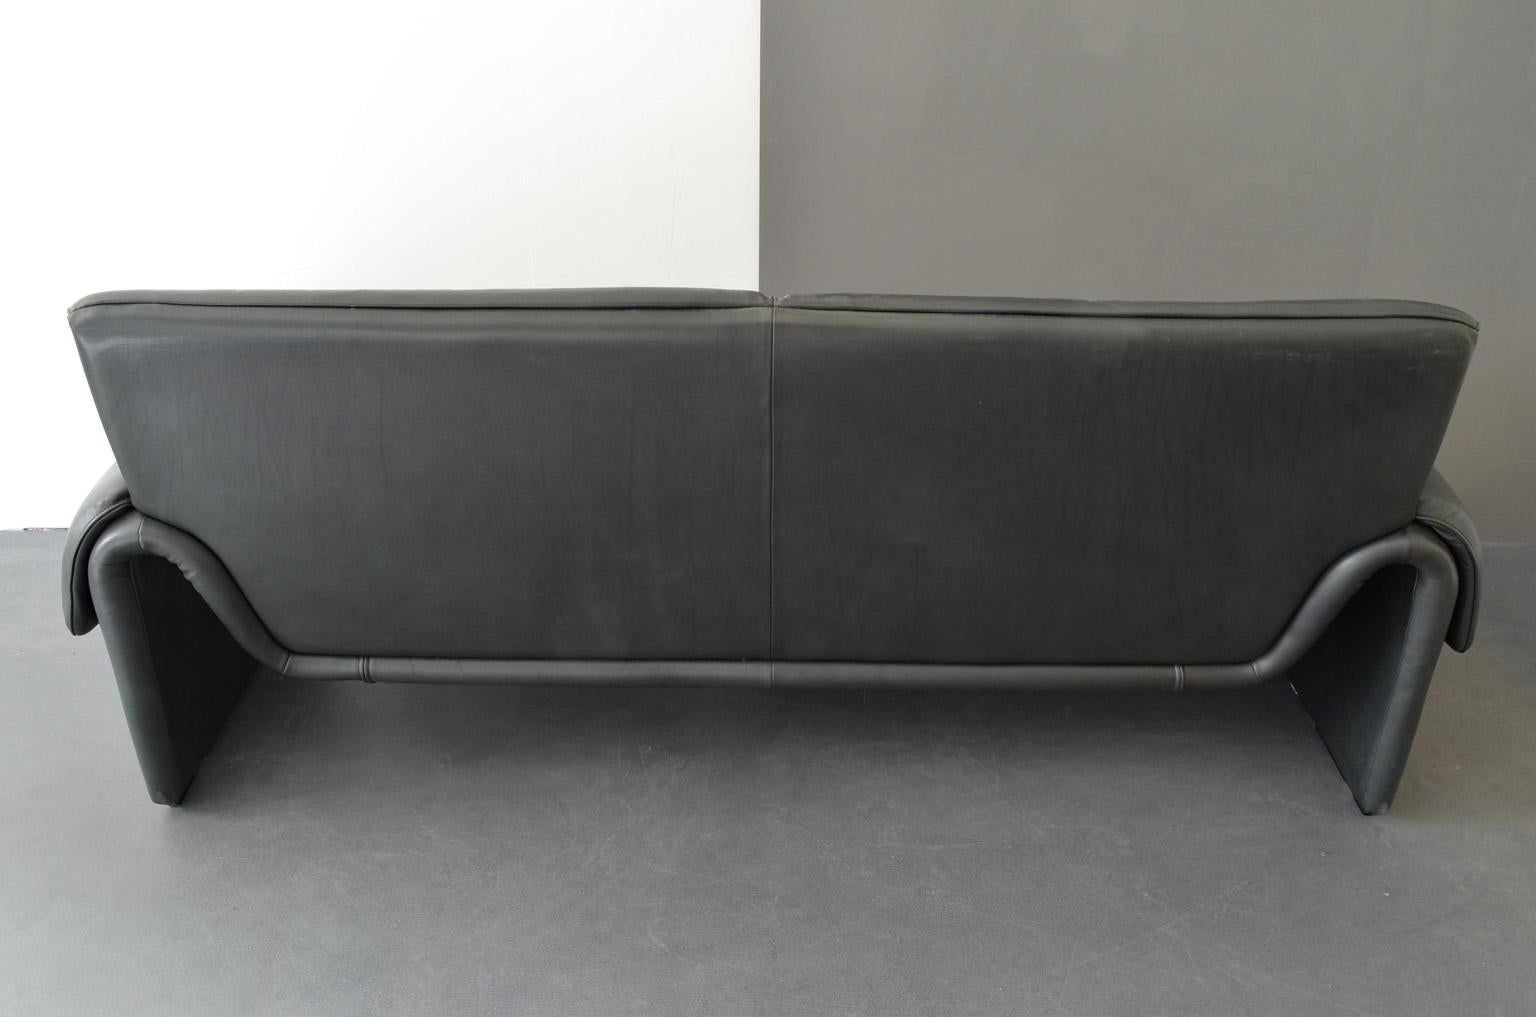 Two-seat sofa “DS-2011/12” by De Sede Factory Design, Switzerland, 1960s.
Upholstered with black leather.